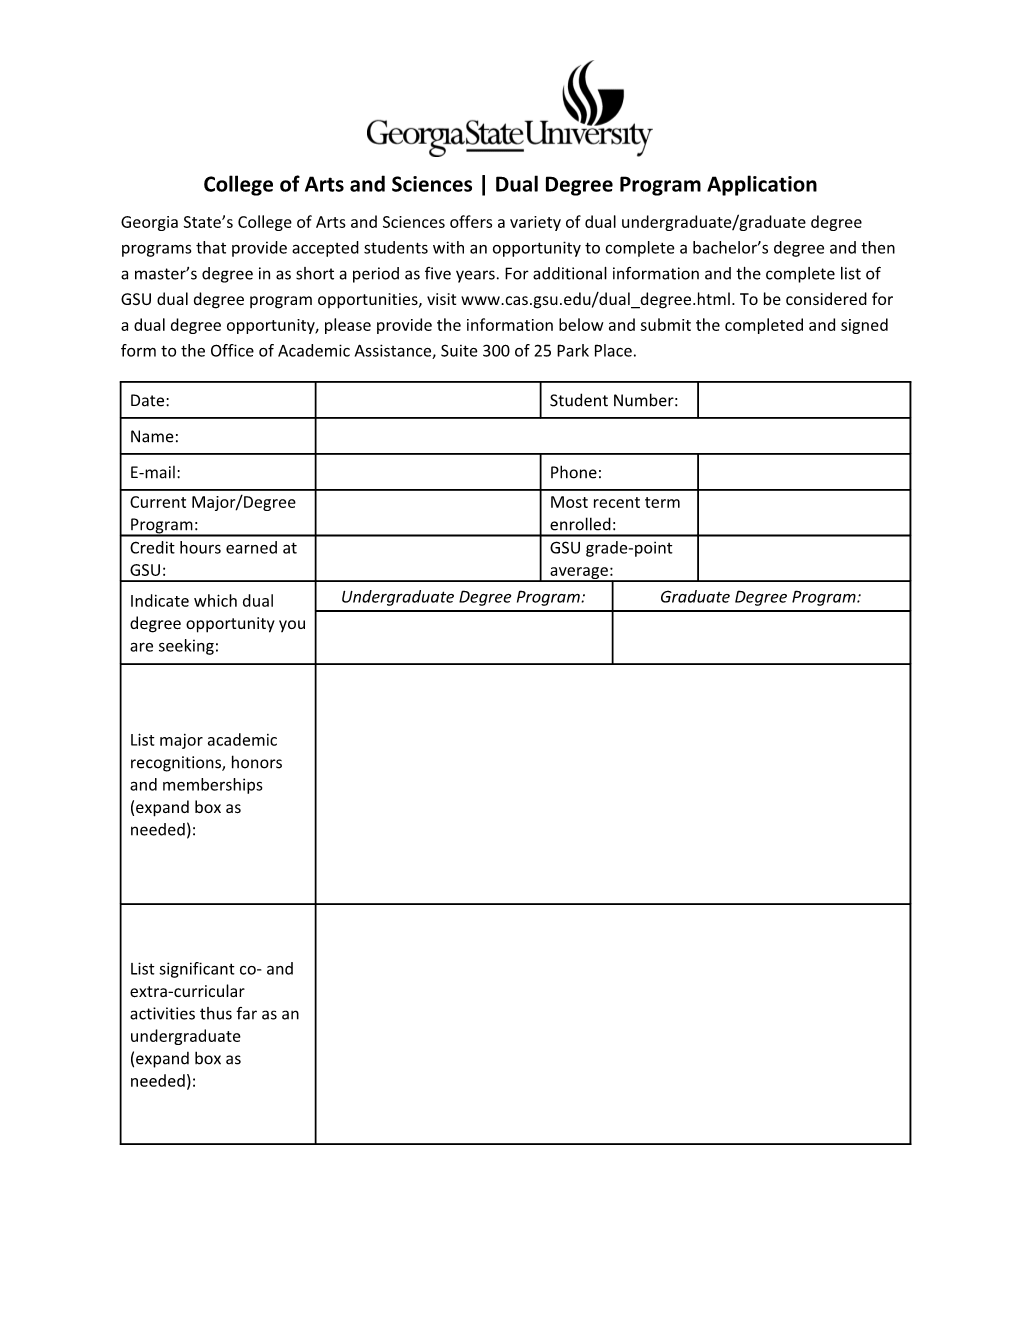 College of Arts and Sciences Dual Degree Program Application